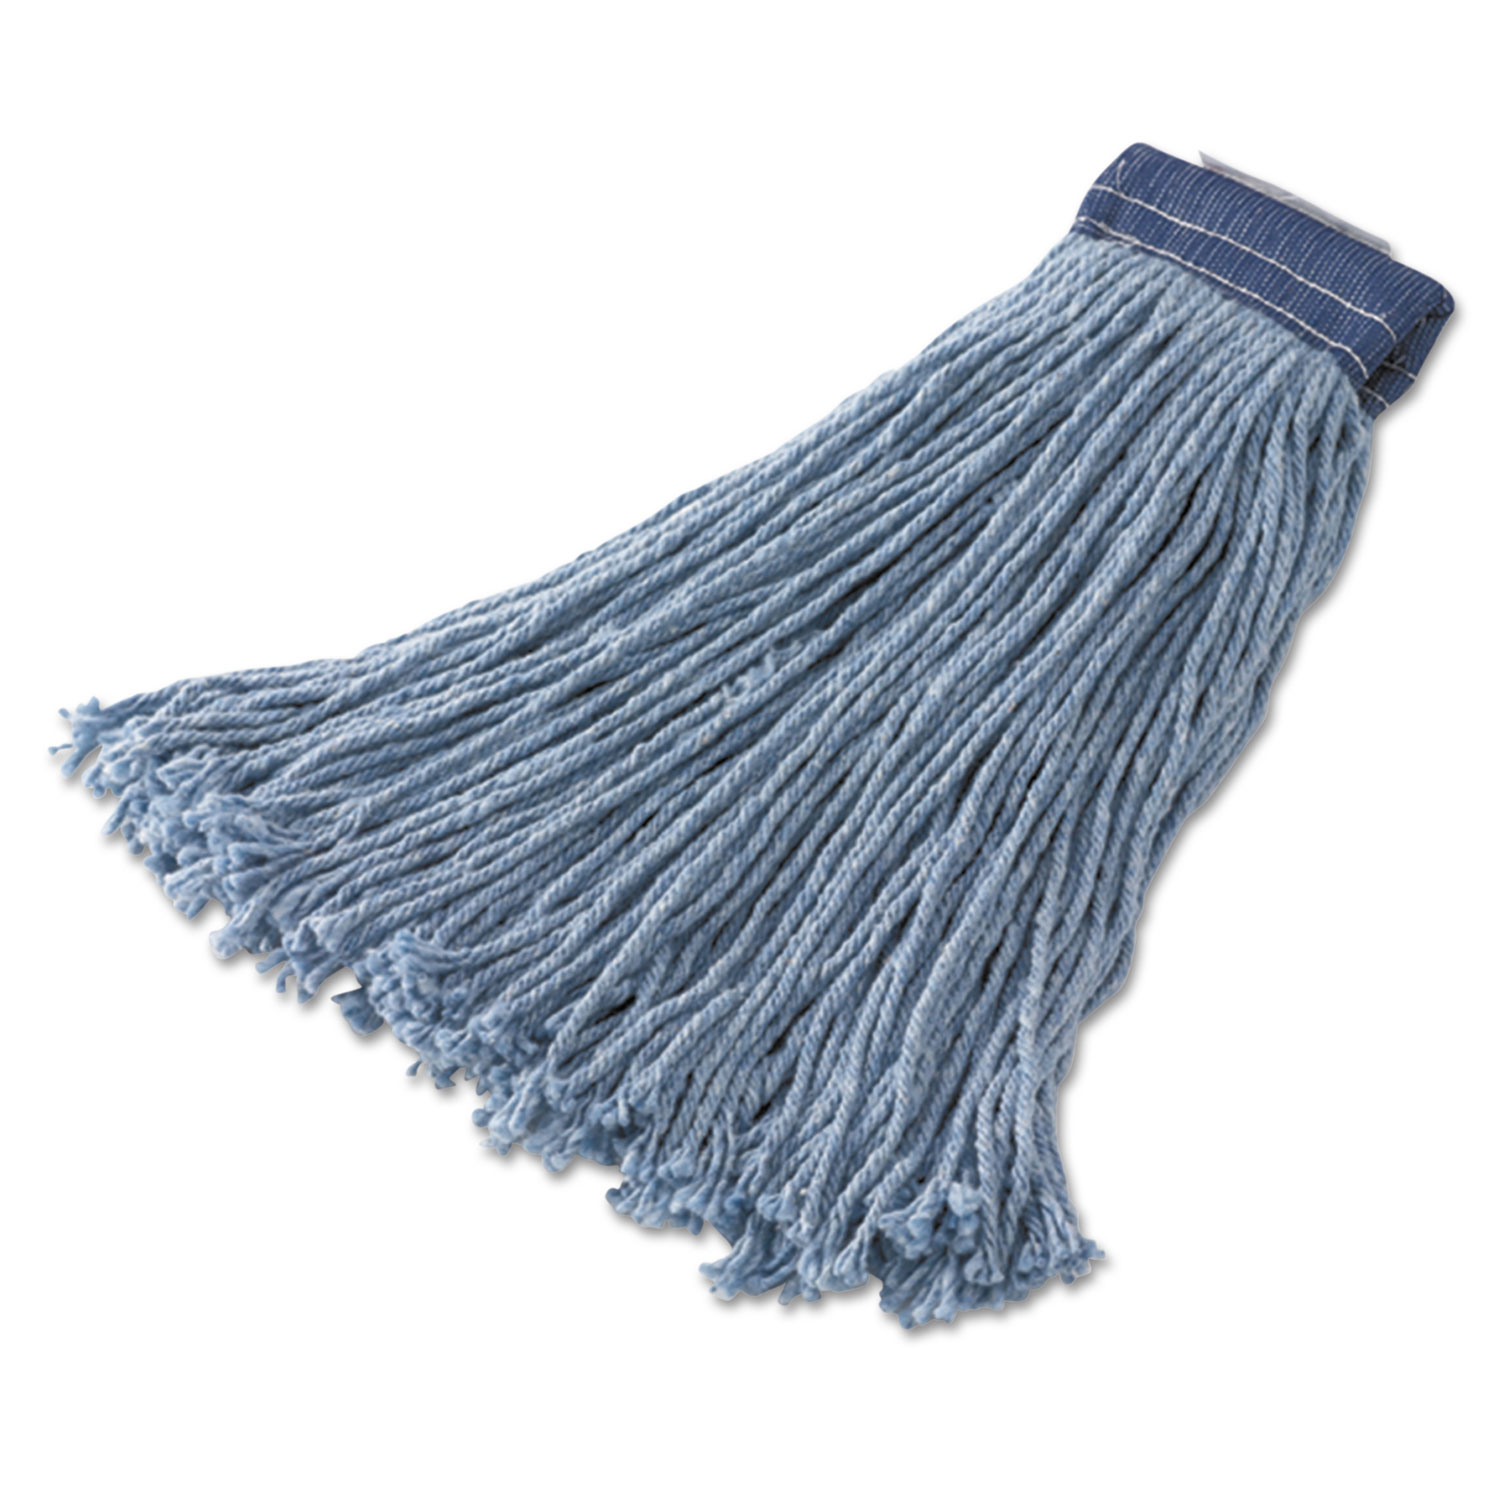  Rubbermaid Commercial FGF55900BL00 Non-Launderable Cotton/Synthetic Cut-End Wet Mop Heads, Ctn/Syn, 32oz, BE,12/CT (RCPF559BLU) 